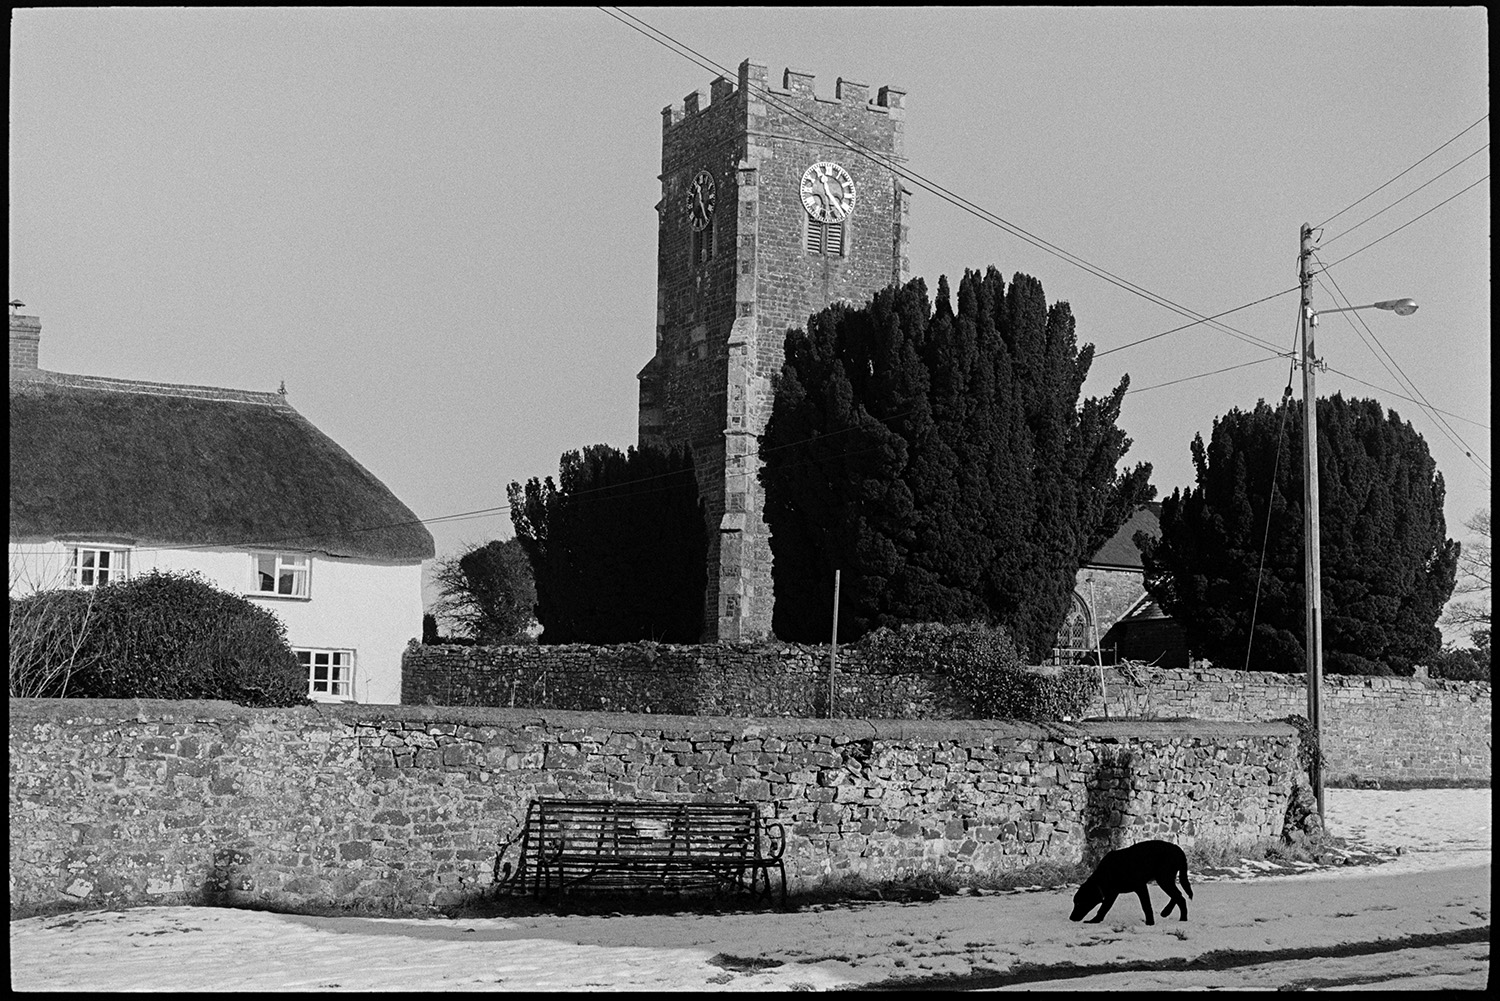 Snow, church with tower and dog. 
[A dog walking along a snowy street past a stone wall and bench in Coldridge. The church tower and a thatched cottage can be seen in the background.]